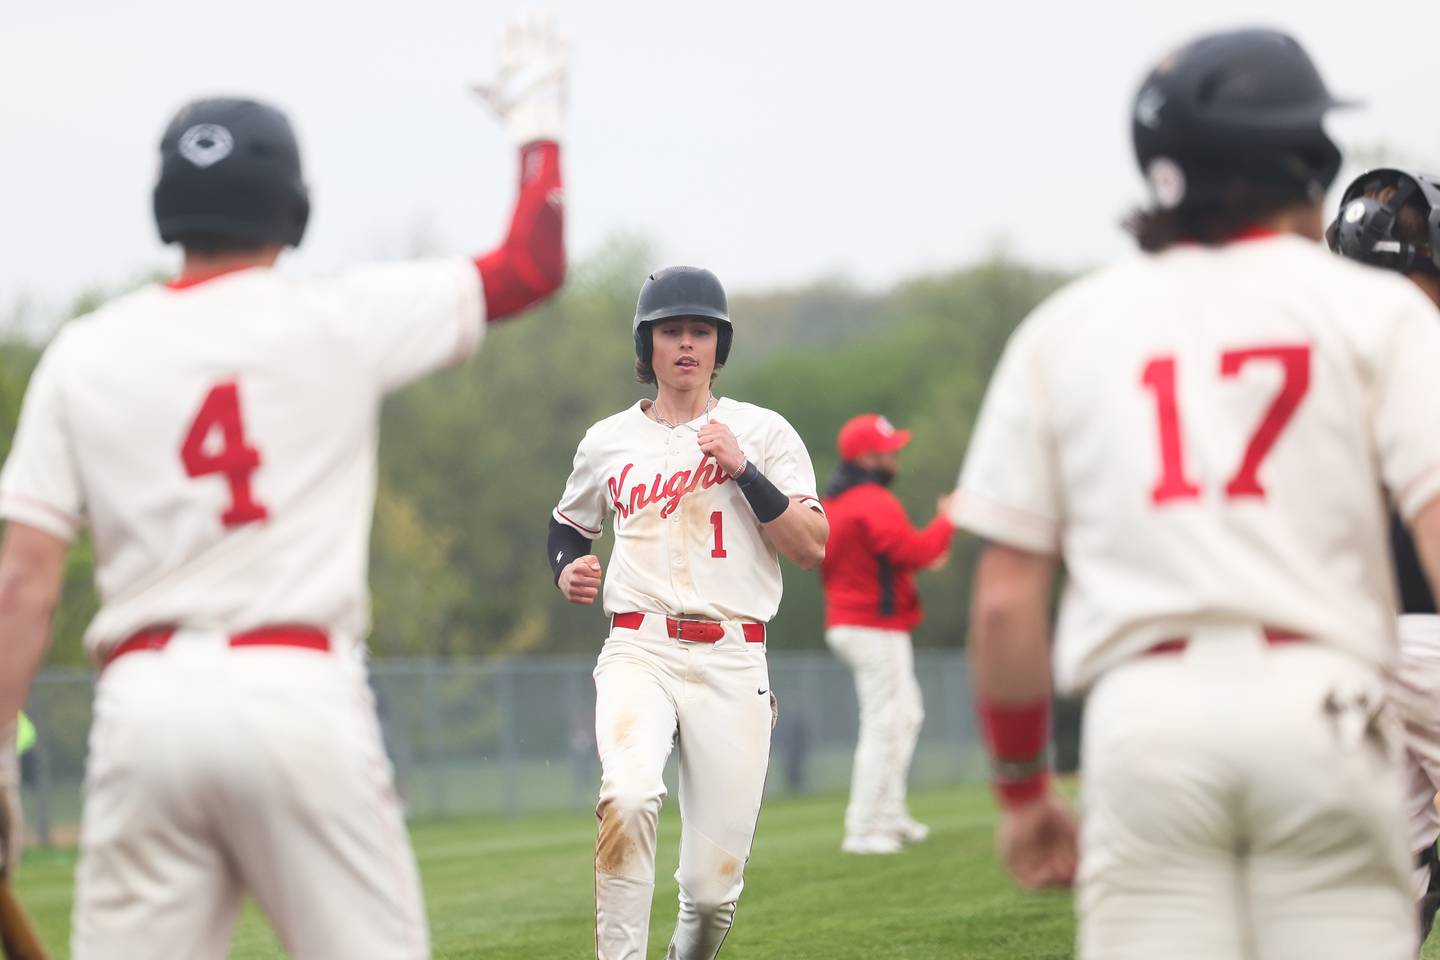 Lincoln-Way Central’s Landon Mensik scores on a Jack Novak double against Lincoln-Way West on Monday, May 8, 2023 in New Lenox.